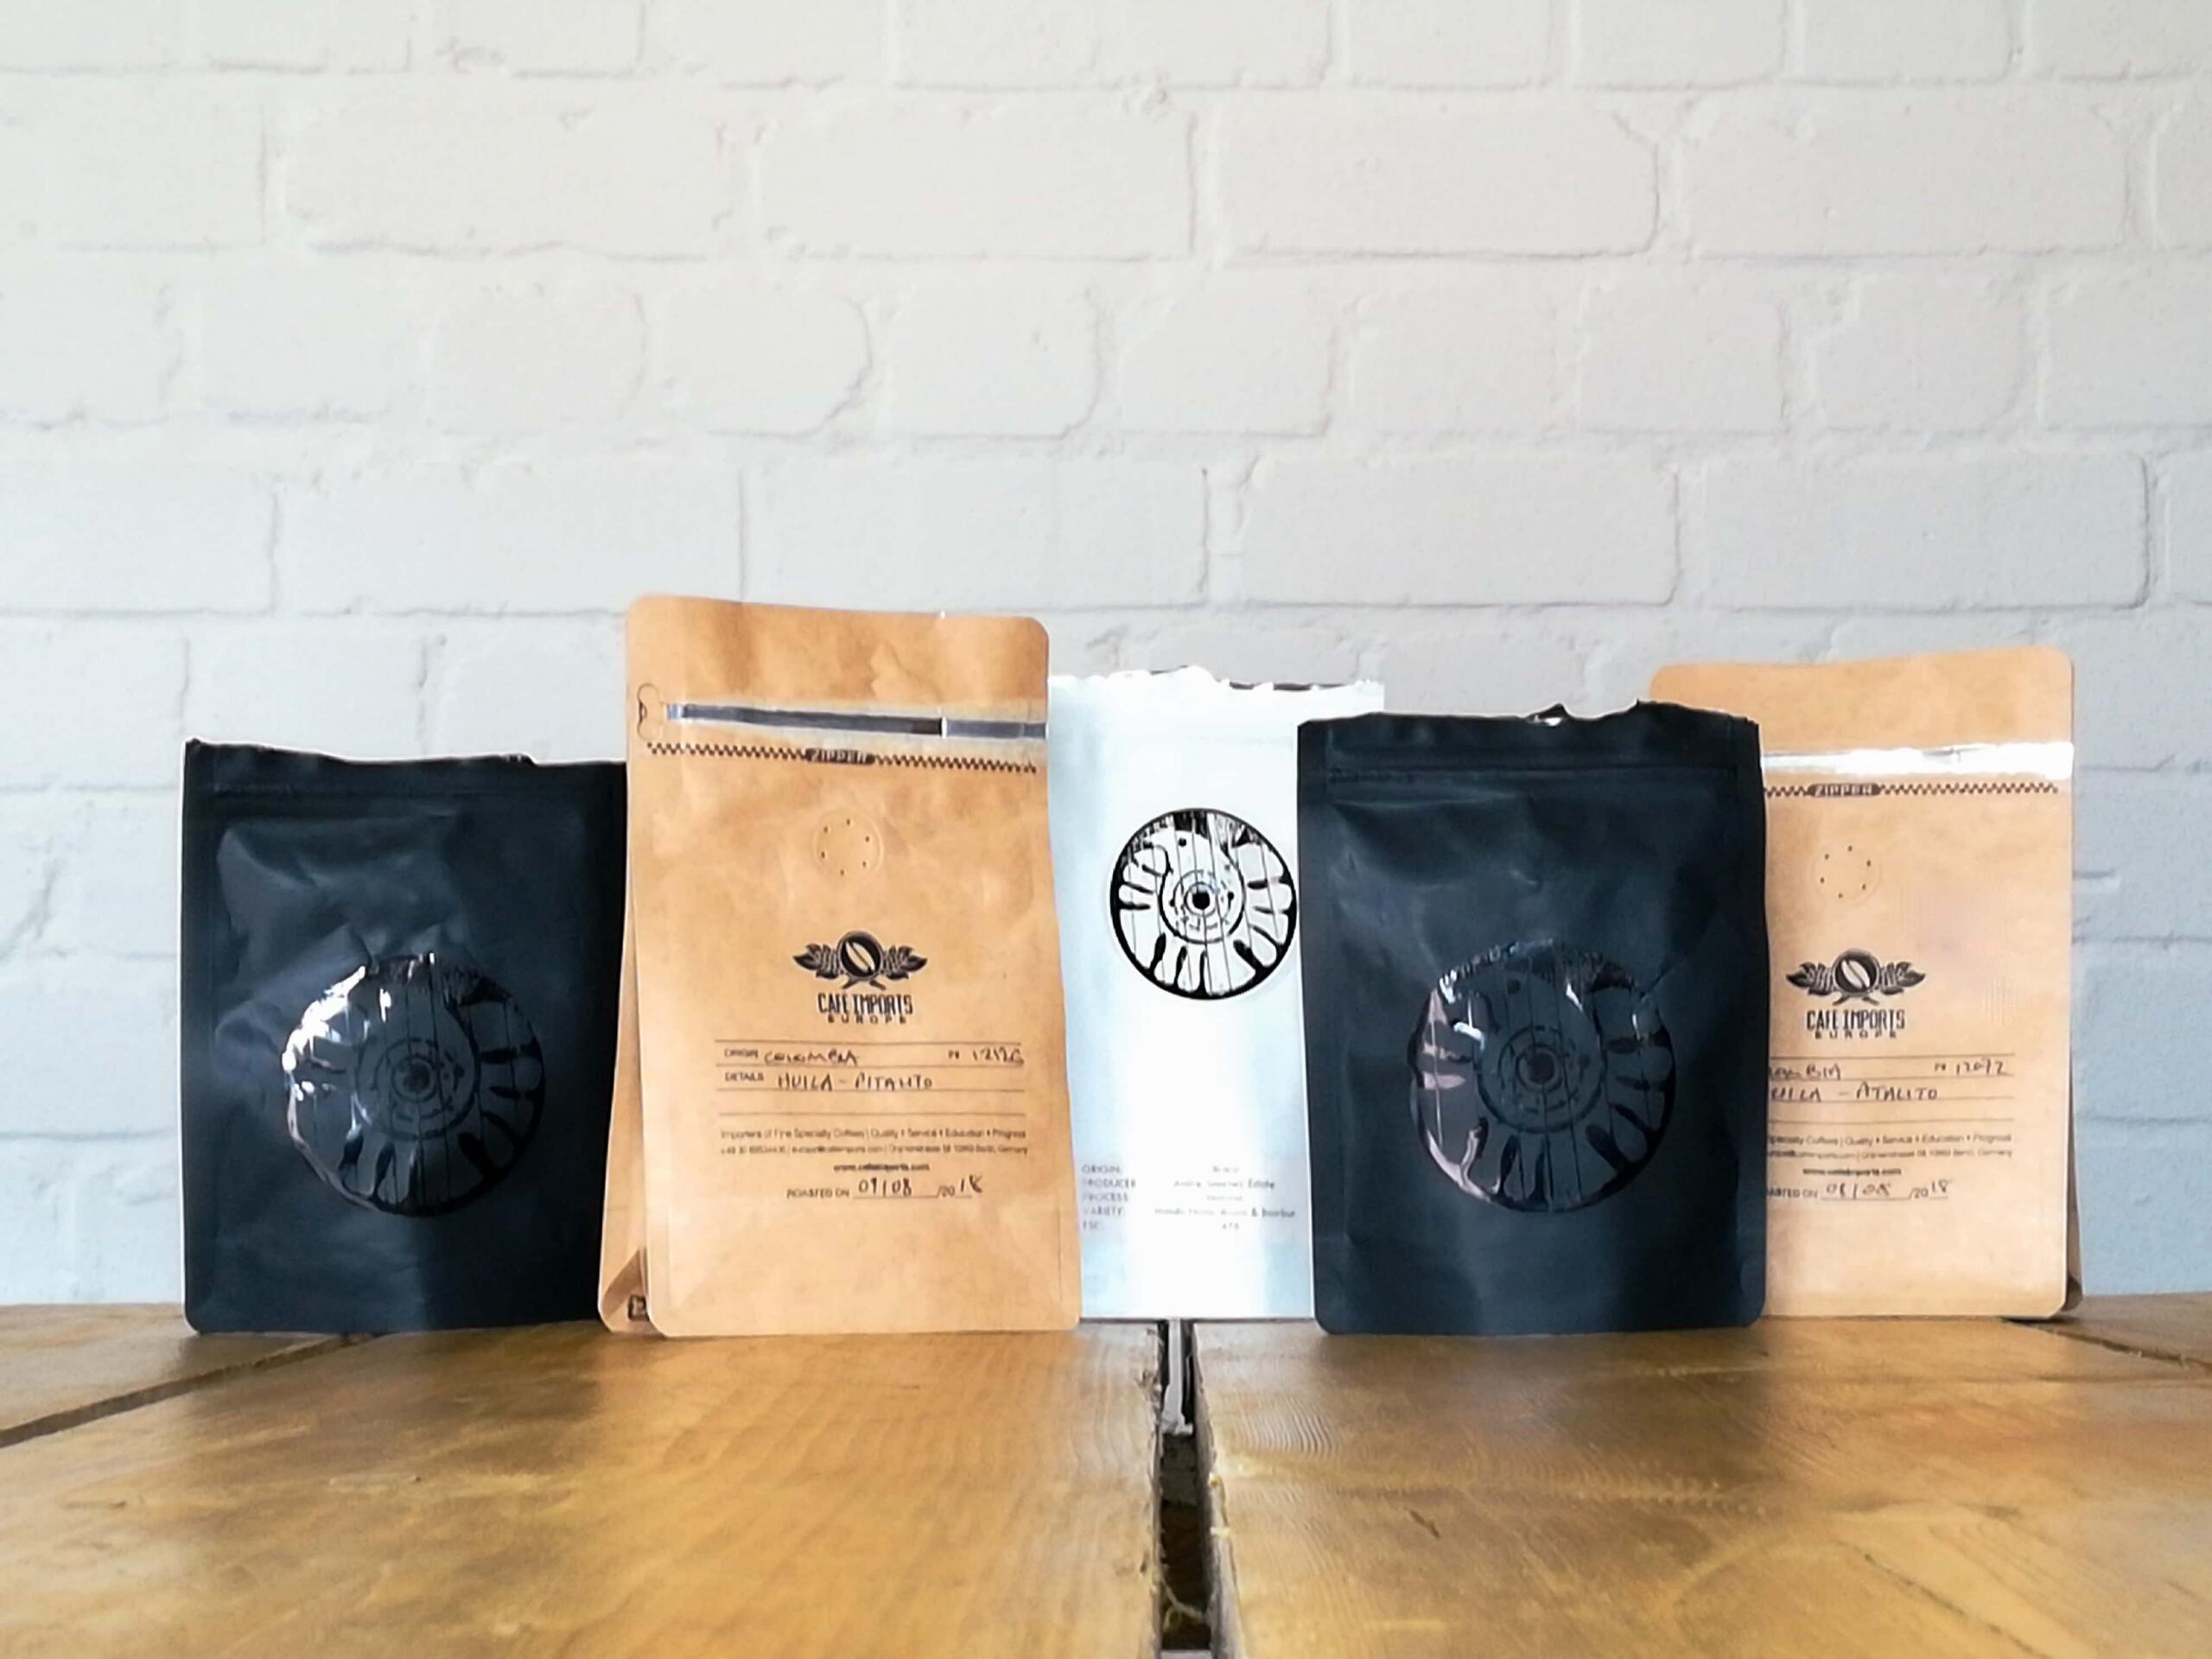 A selection of bags of coffee